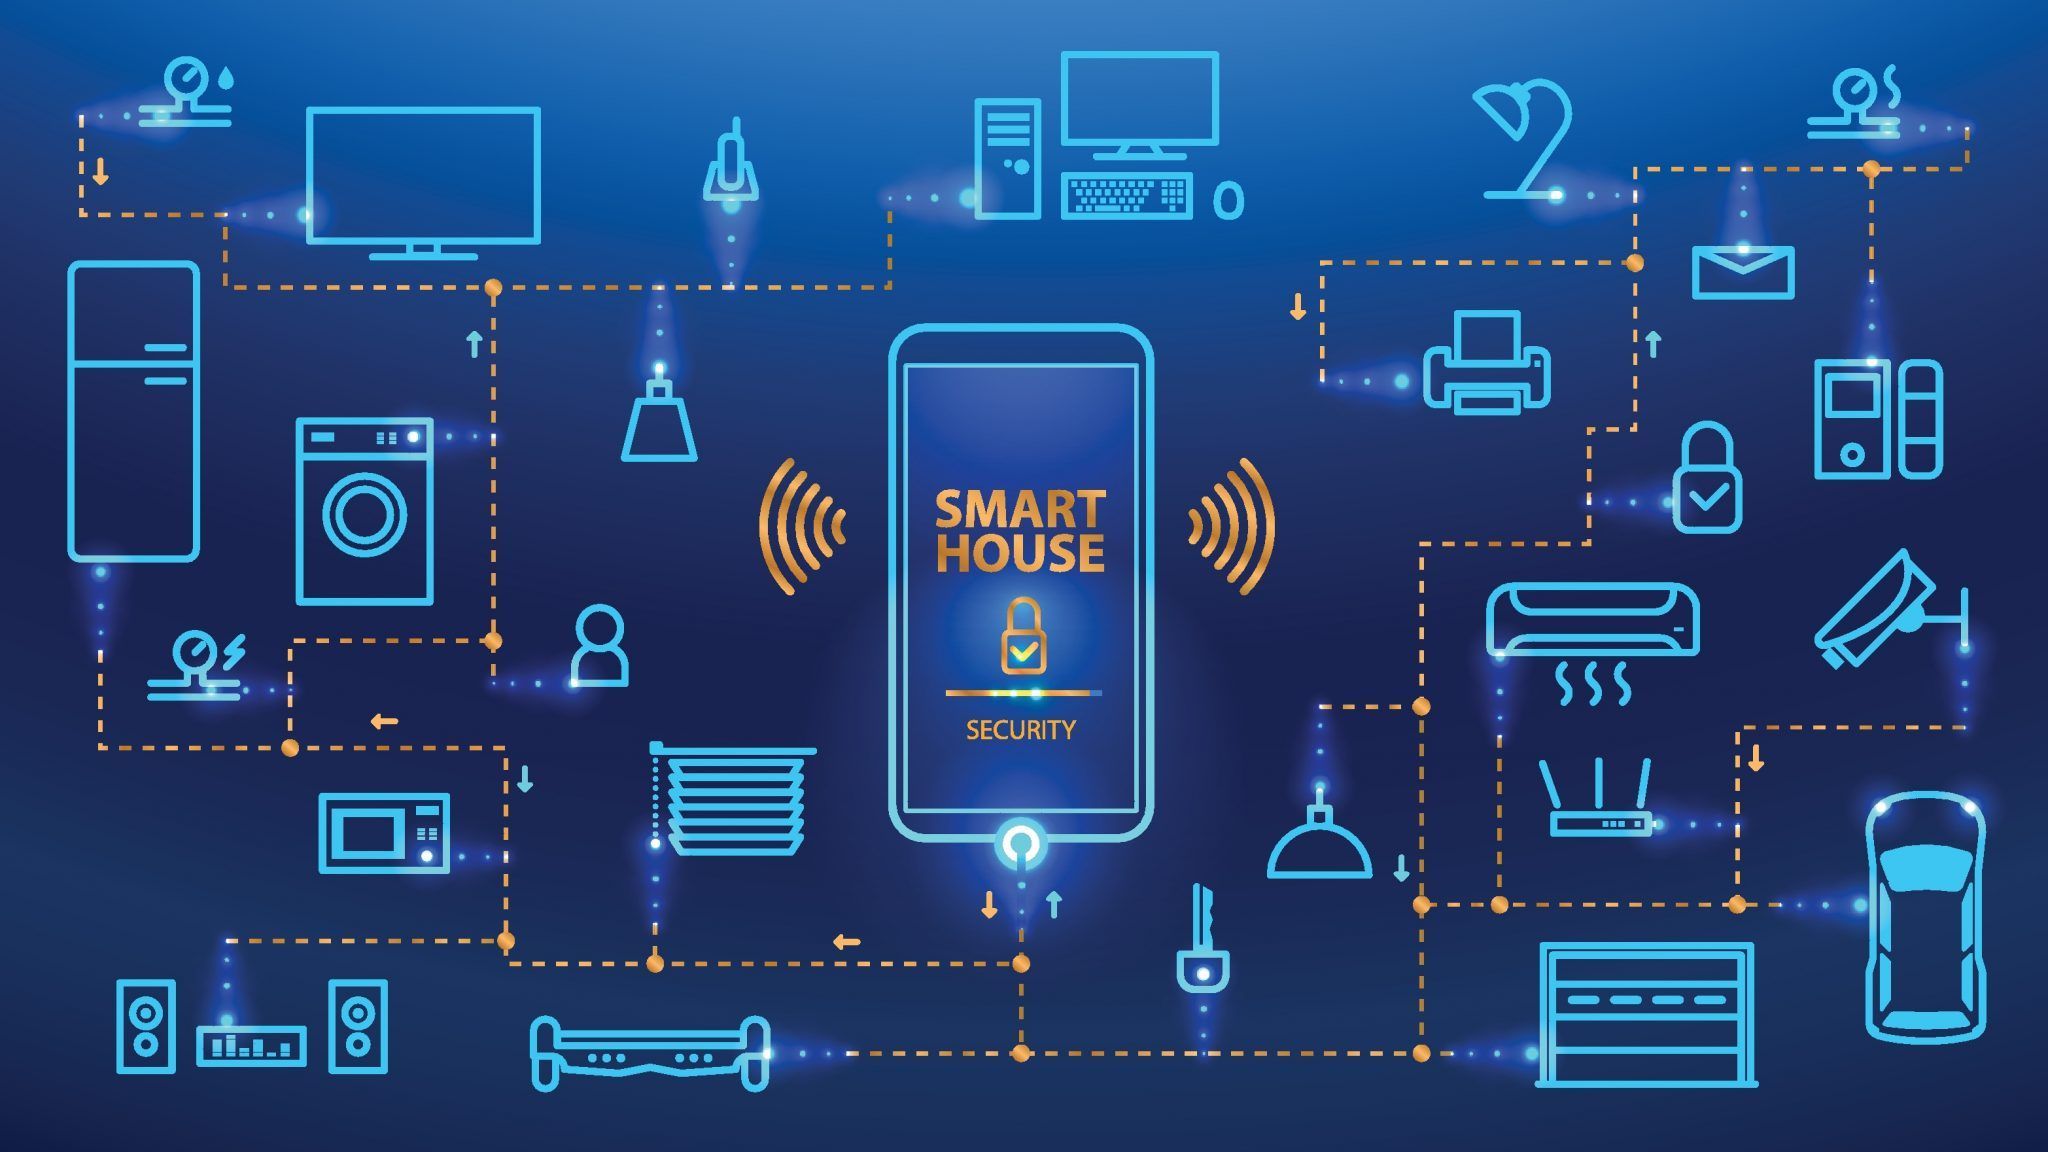 What's the very best smart home system? : PeopleTalentLink